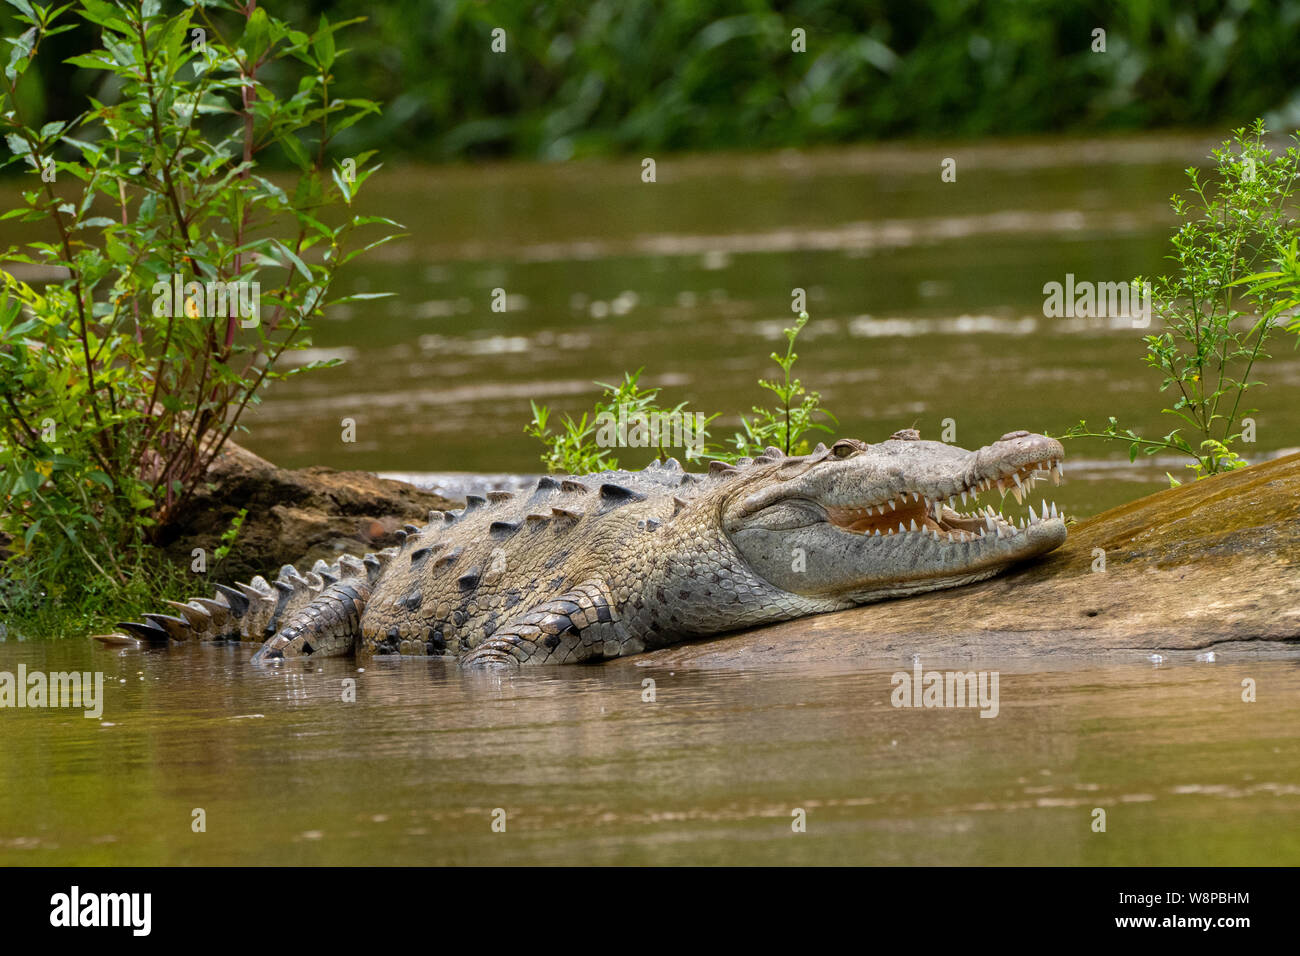 The American crocodile is a large crocodilian that can reach lengths up to  7 metres (4 m being average adult size Stock Photo - Alamy